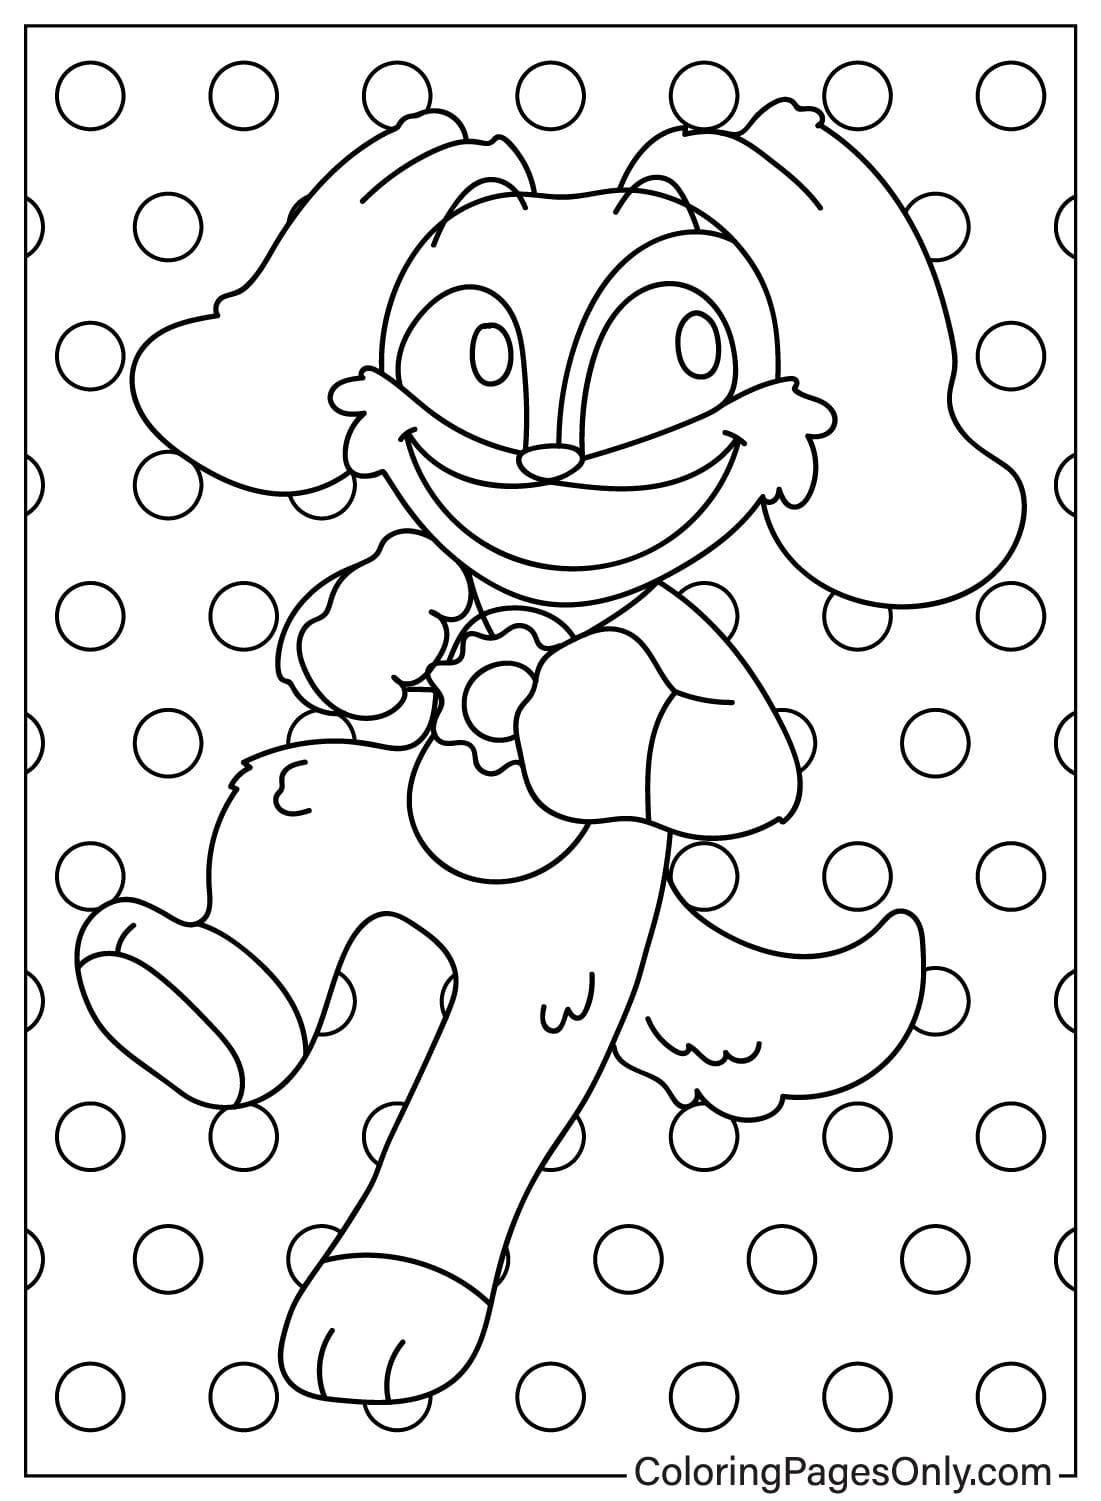 DogDay Free Printable Coloring Page from DogDay